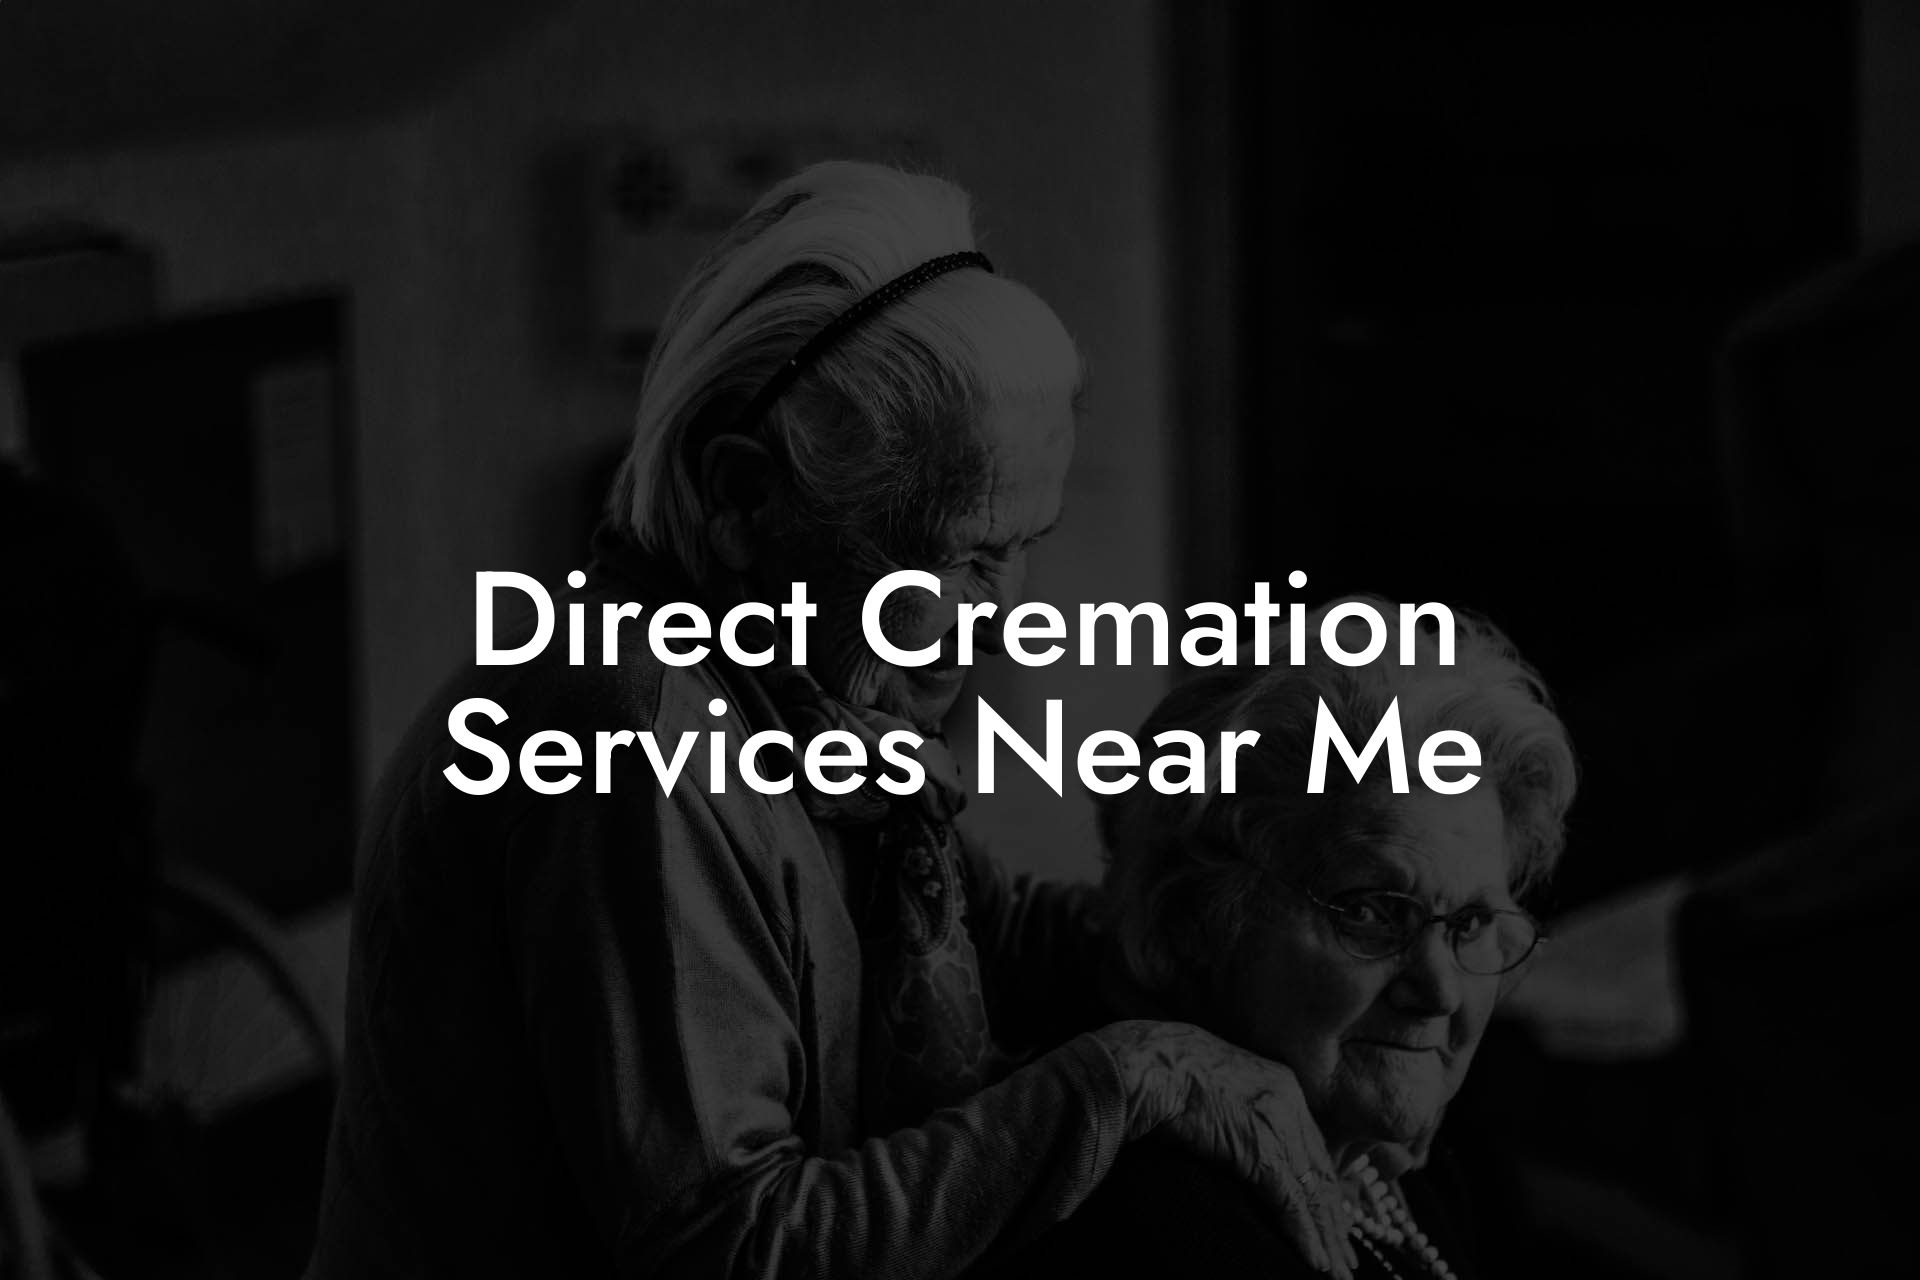 Direct Cremation Services Near Me